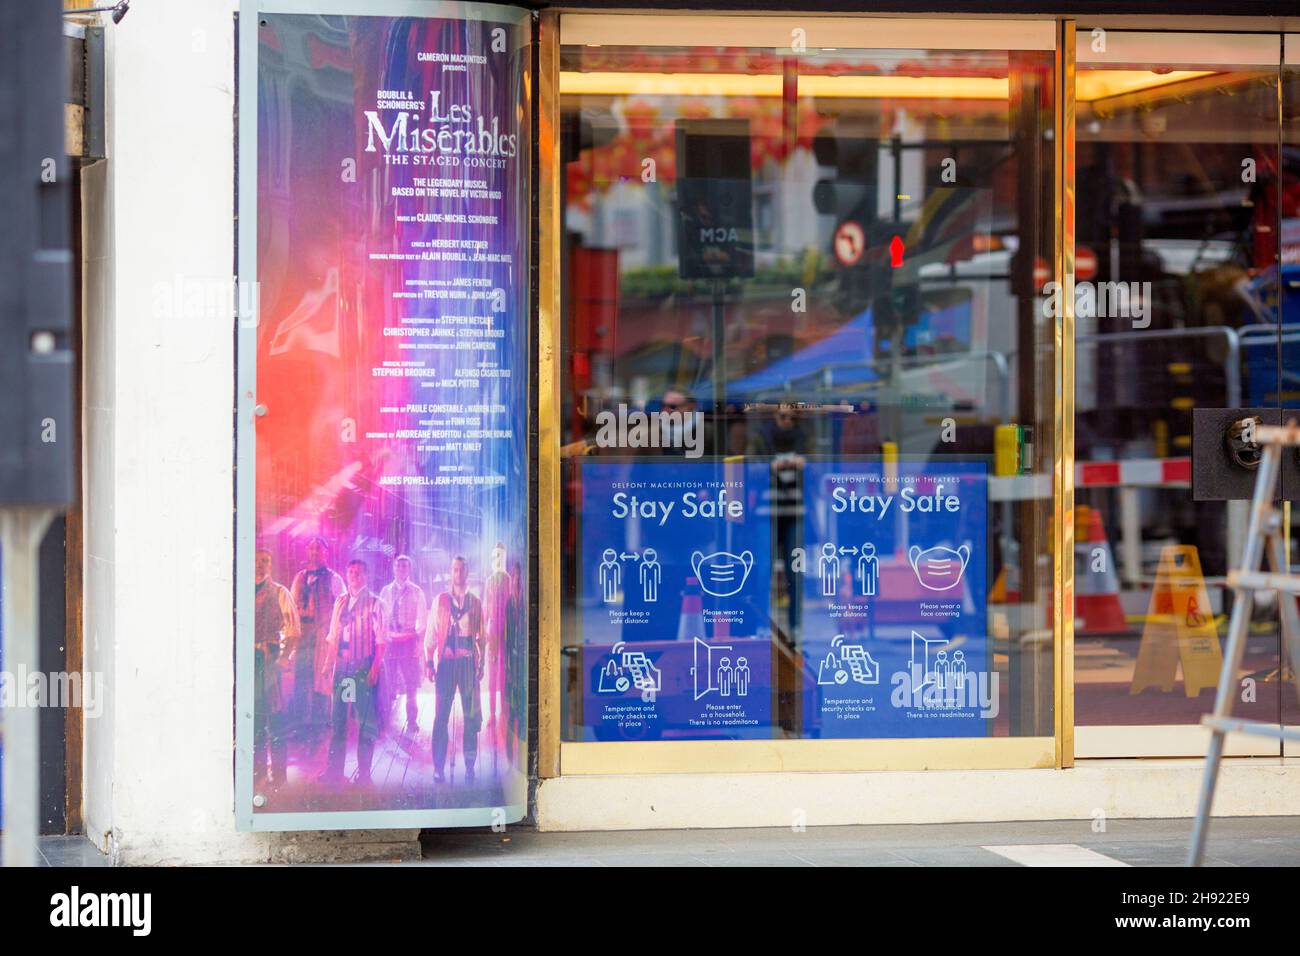 Instructions of health measures are seen in the window of a theatre in central London ahead of the next stage of lockdown easing. Stock Photo